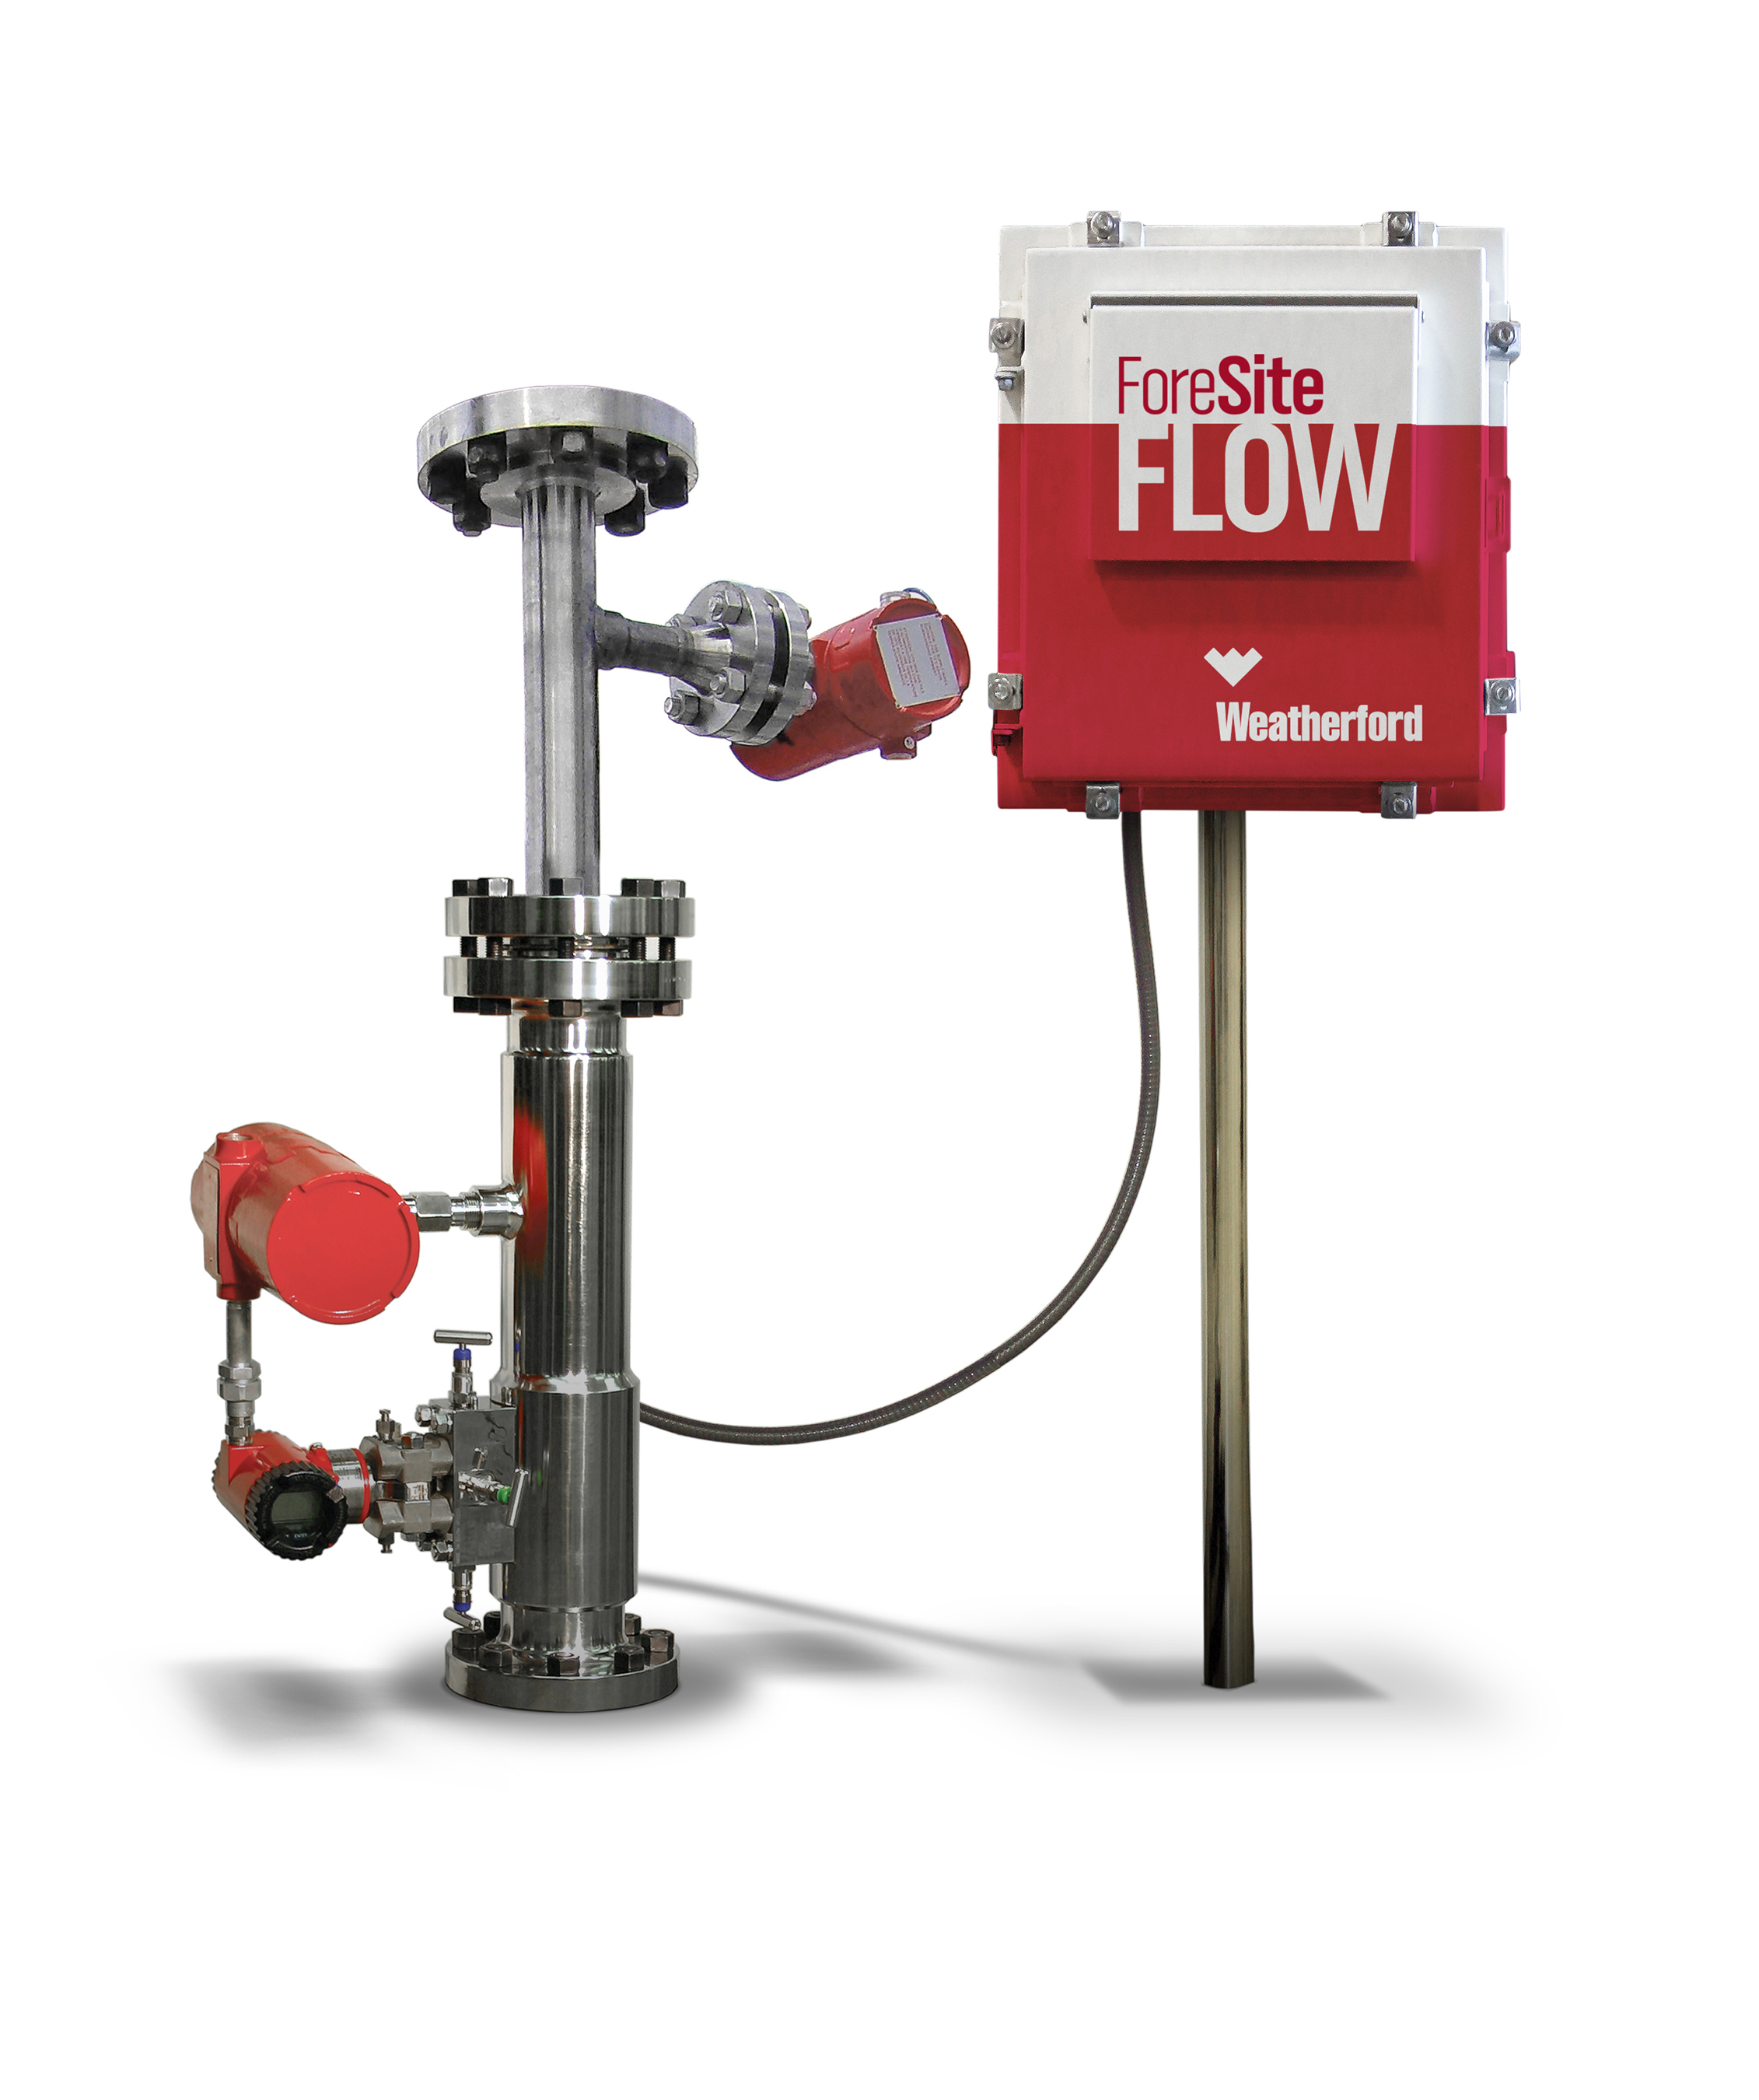 ForeSite Flow delivers full-range, non-nuclear flow insight for individual or group wells in real time. By eliminating bulky test separators from the wellsite and erasing the nuclear-source management typically associated with inline multiphase flowmeters, ForeSite Flow reduces both capital and operating expenses while increasing well-test frequency and accuracy.